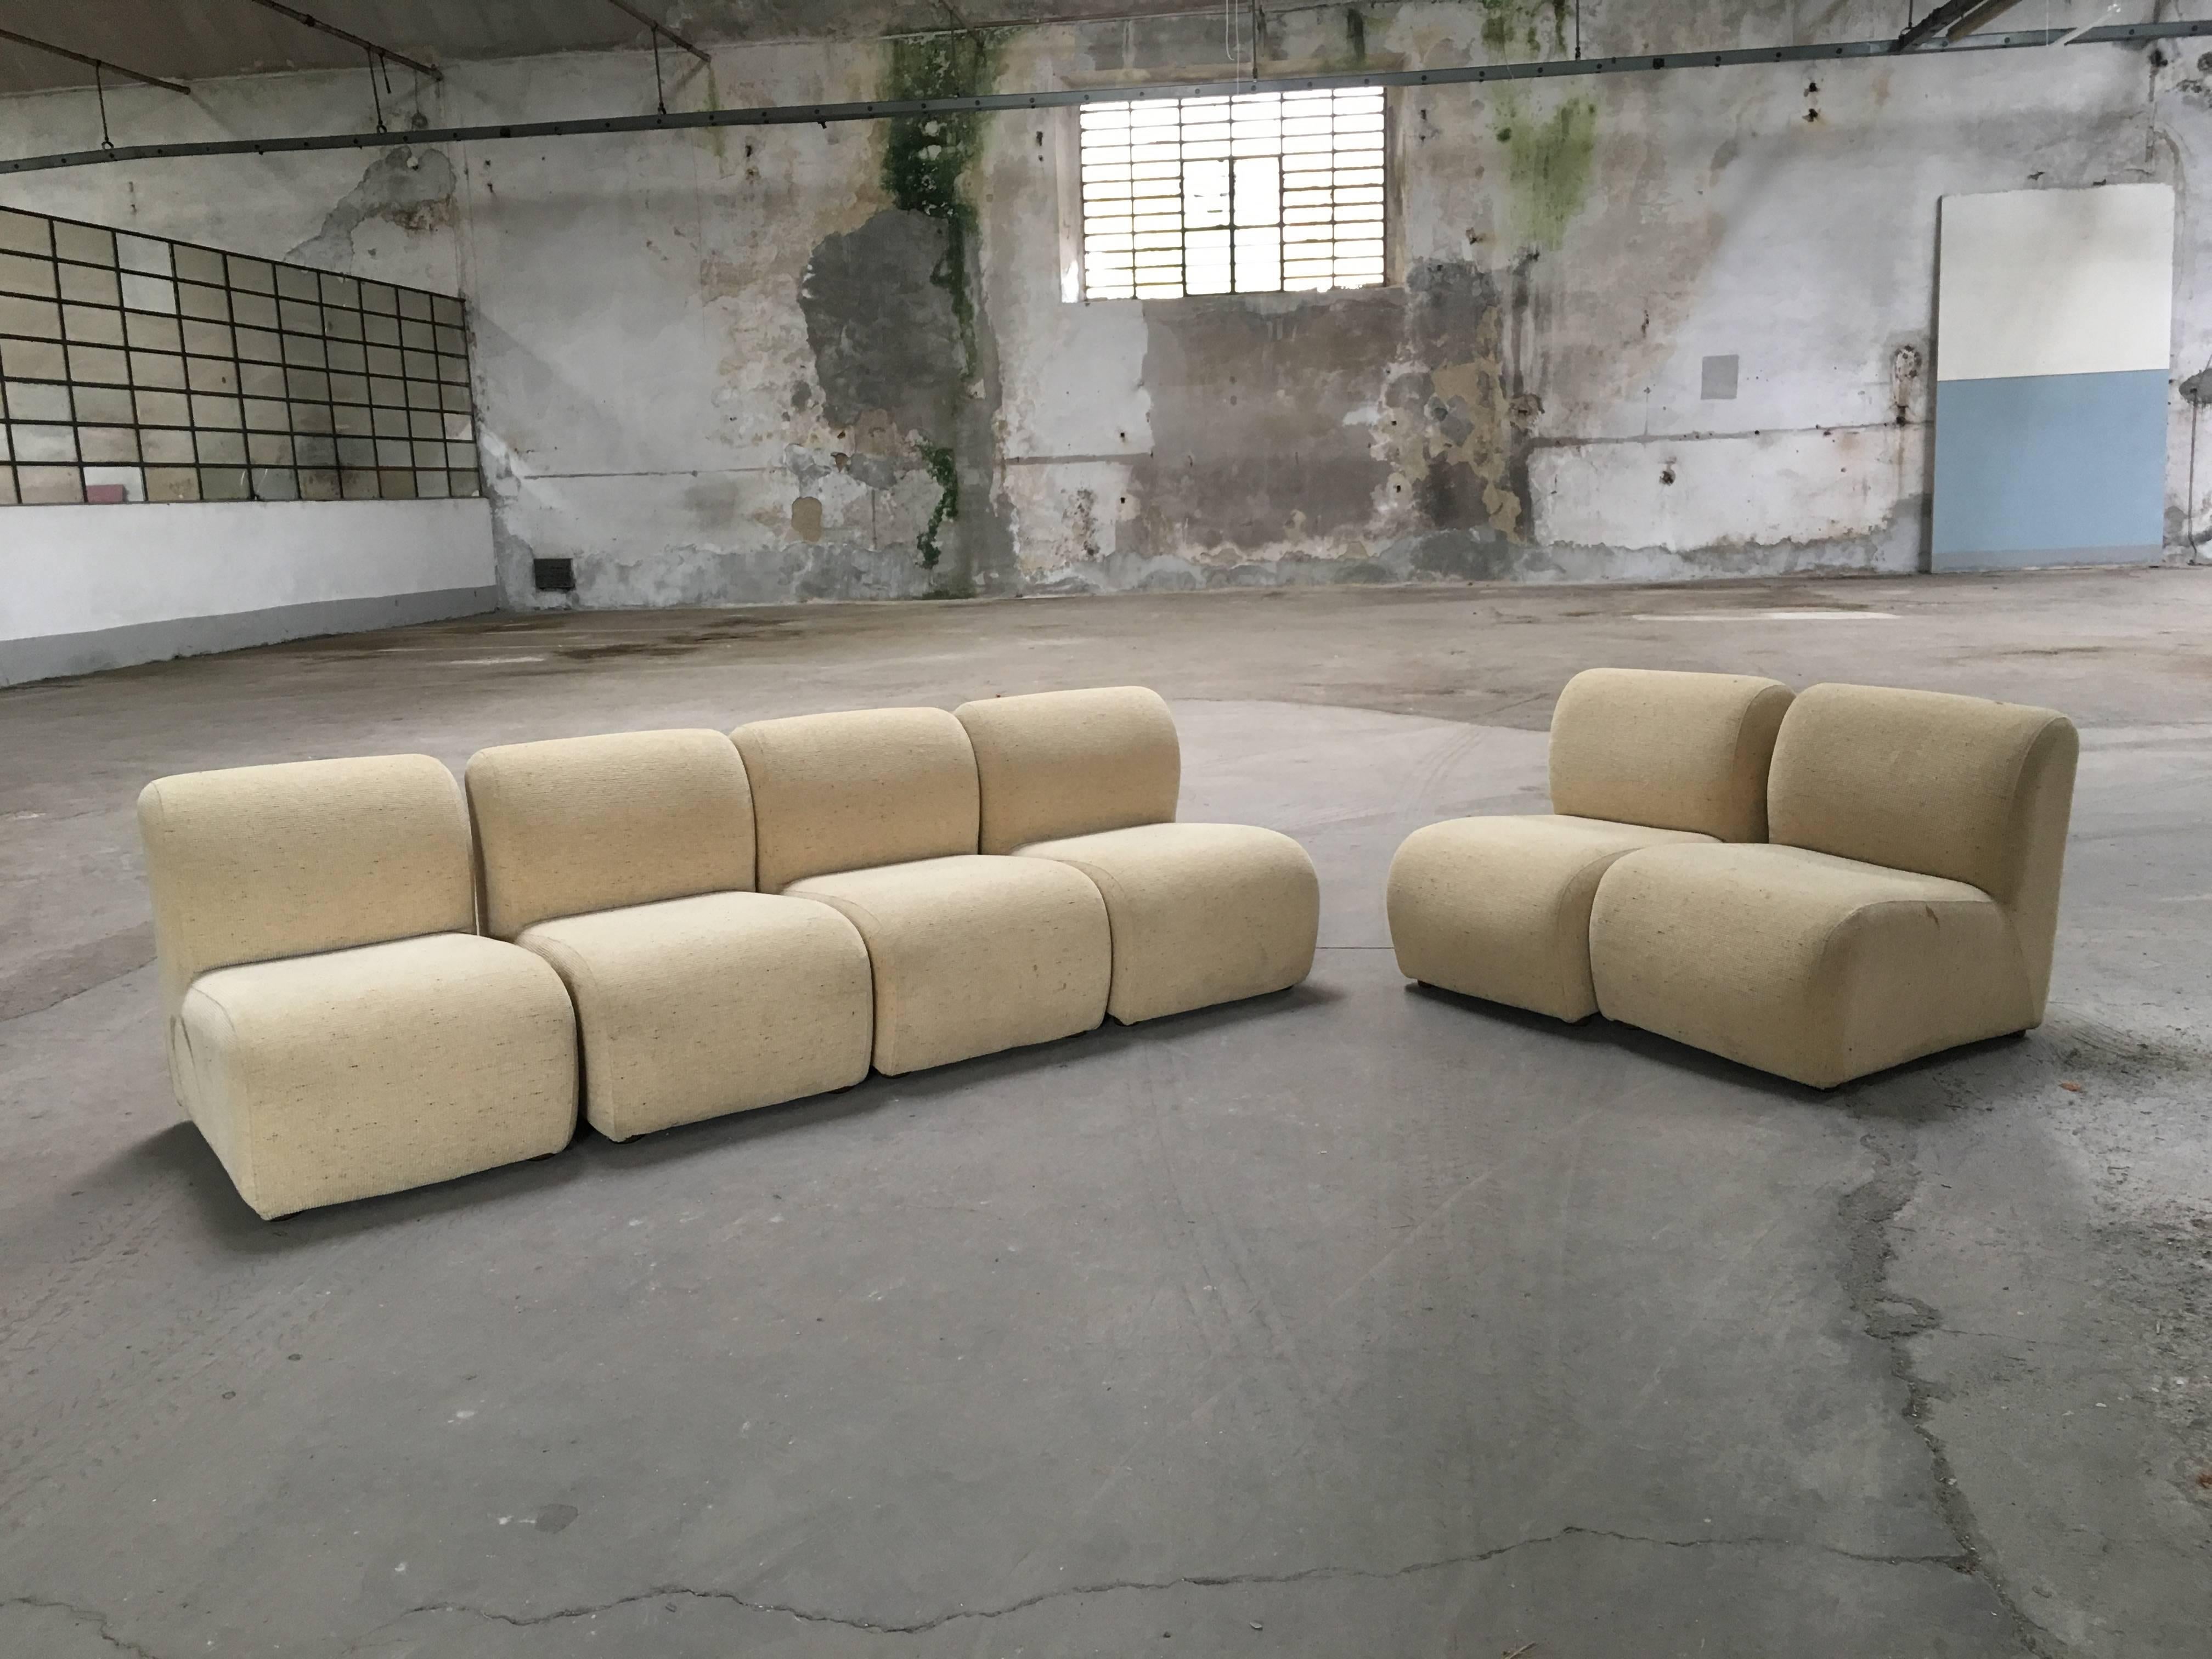 Italian Modular sofa with original tapestry in very good conditions.
The sofa is composed by six pieces.
Each piece measures: Length cm 50, depth cm 72, height cm 65, seat height cm 36
The sofa was made in Italy during the 1970s.